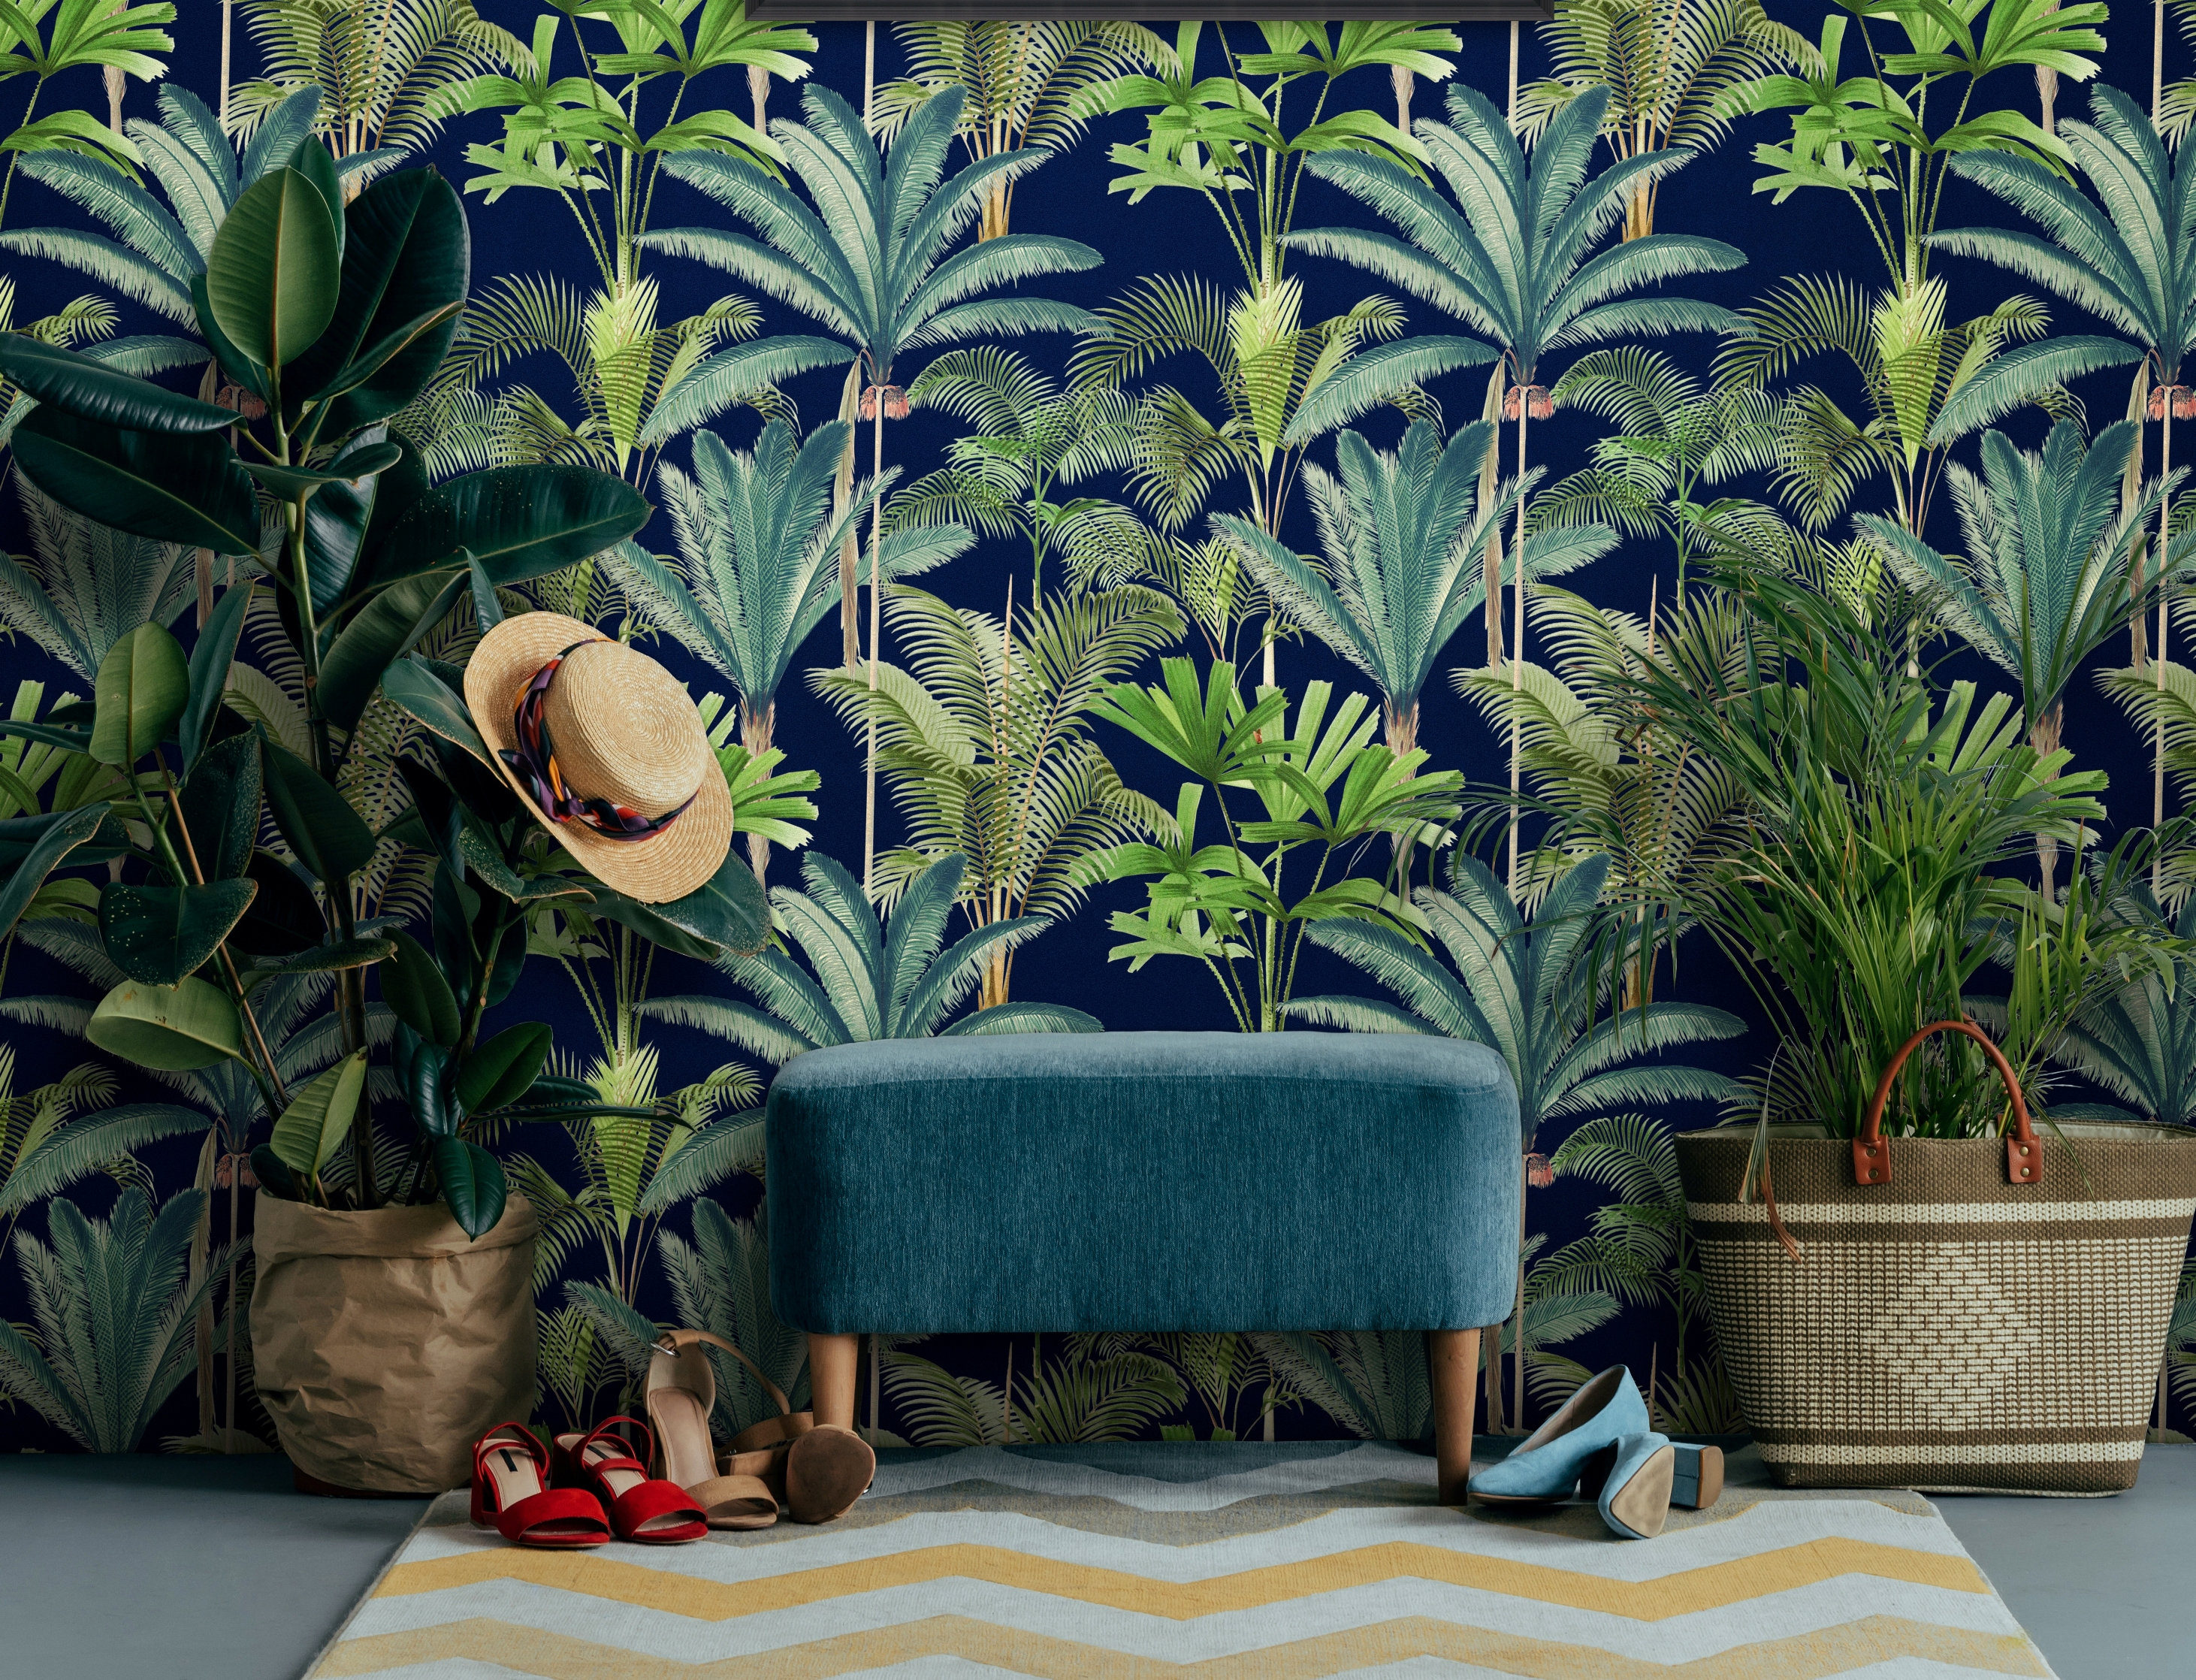 Tropical Jungle Night Leaves Pattern 1 tropical decor art society6  Window Curtains  Leaves wallpaper iphone Tropical wallpaper Jungle  wallpaper